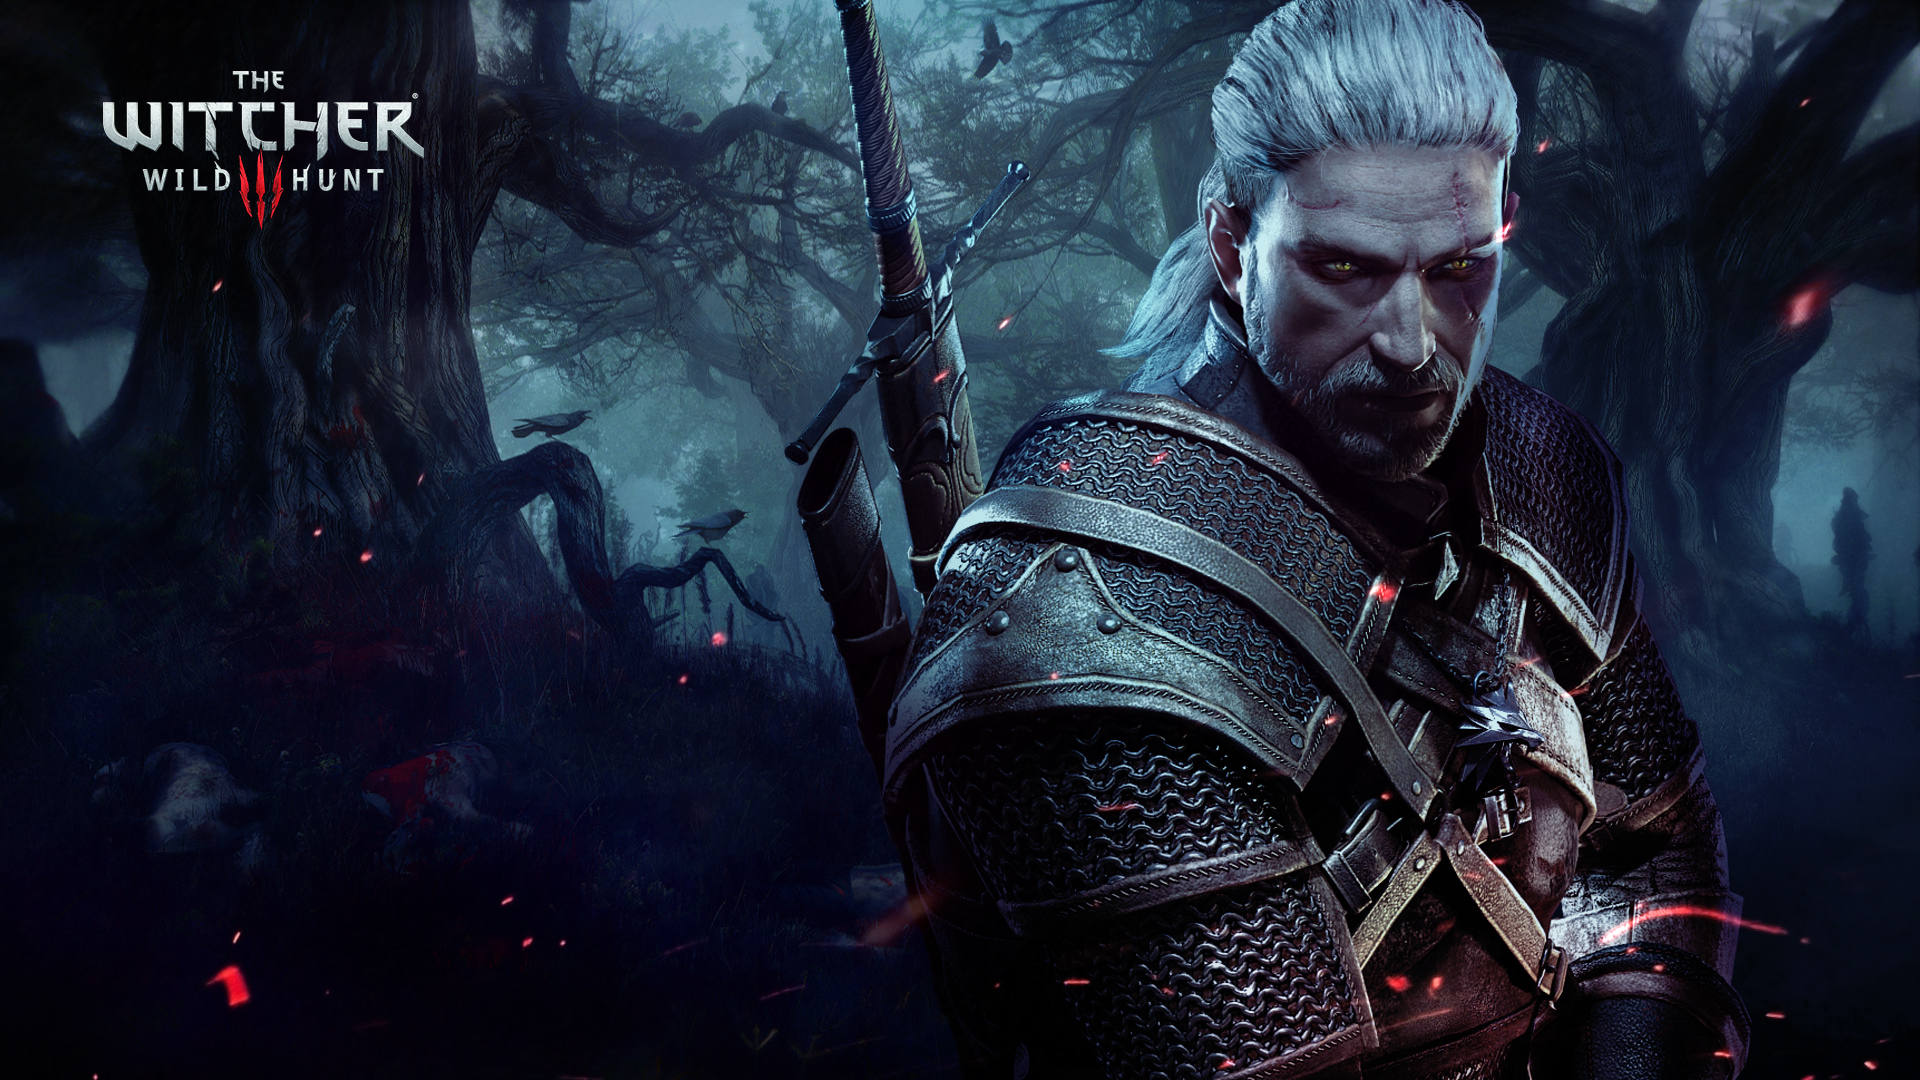 Download Witcher 3 HD Wallpapers   TechJeep 1920x1080